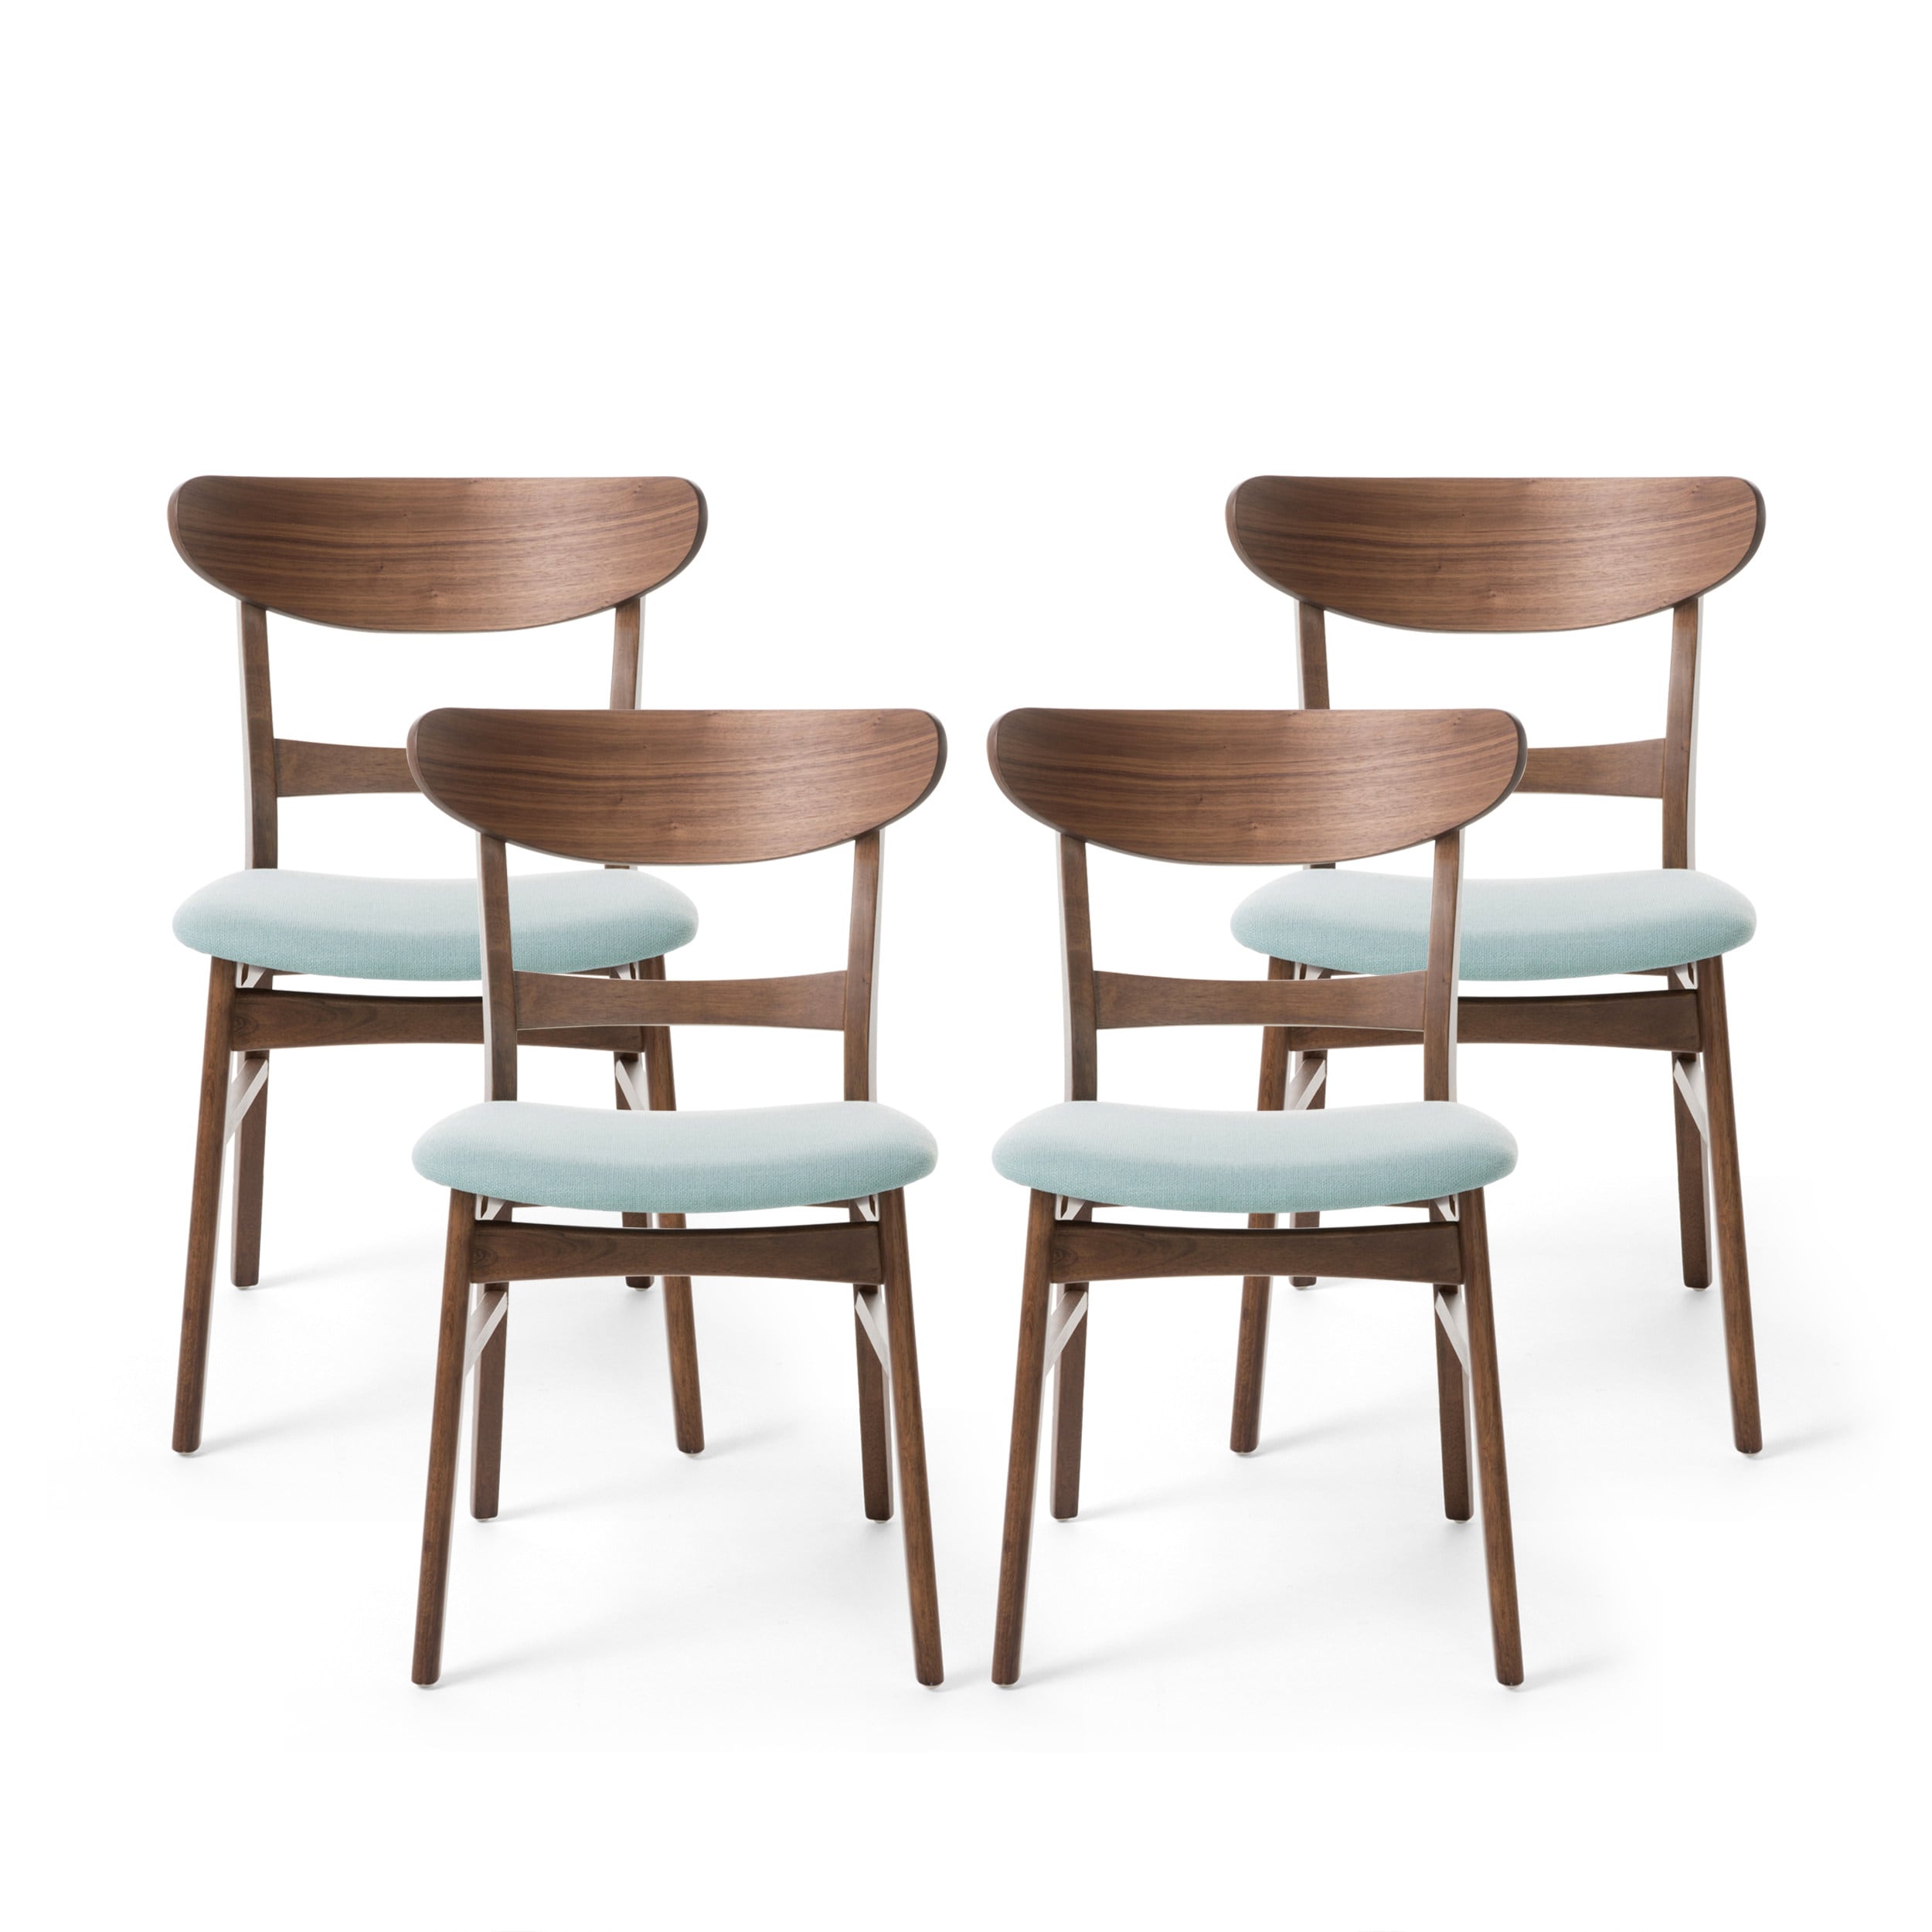 Best Selling Home Decor Idalia Mid Century Modern Dining Chairs Set of 20,  Mint and Walnut